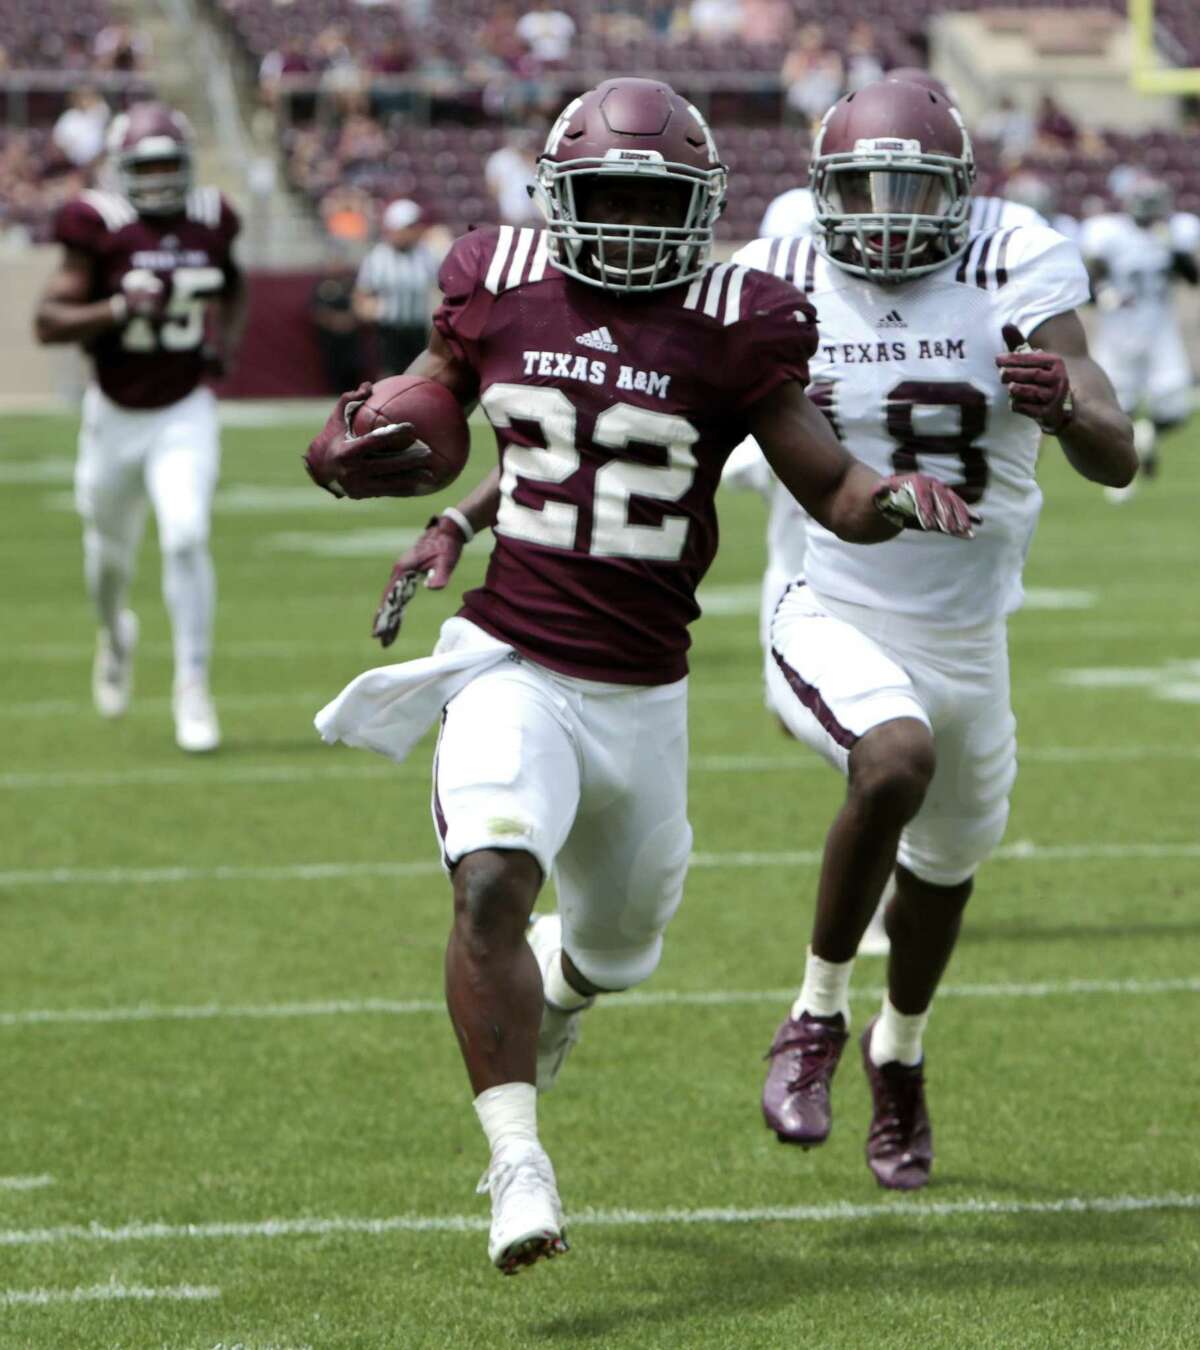 Texas A&M running back Kwame Etwi (22) breaks away from defensive back Kemah Siverand (18) on a long gain up the sidelines during the Texas A&M spring football game at Kyle Field on Saturday, April 8, 2017, in College Station. ( Brett Coomer / Houston Chronicle )